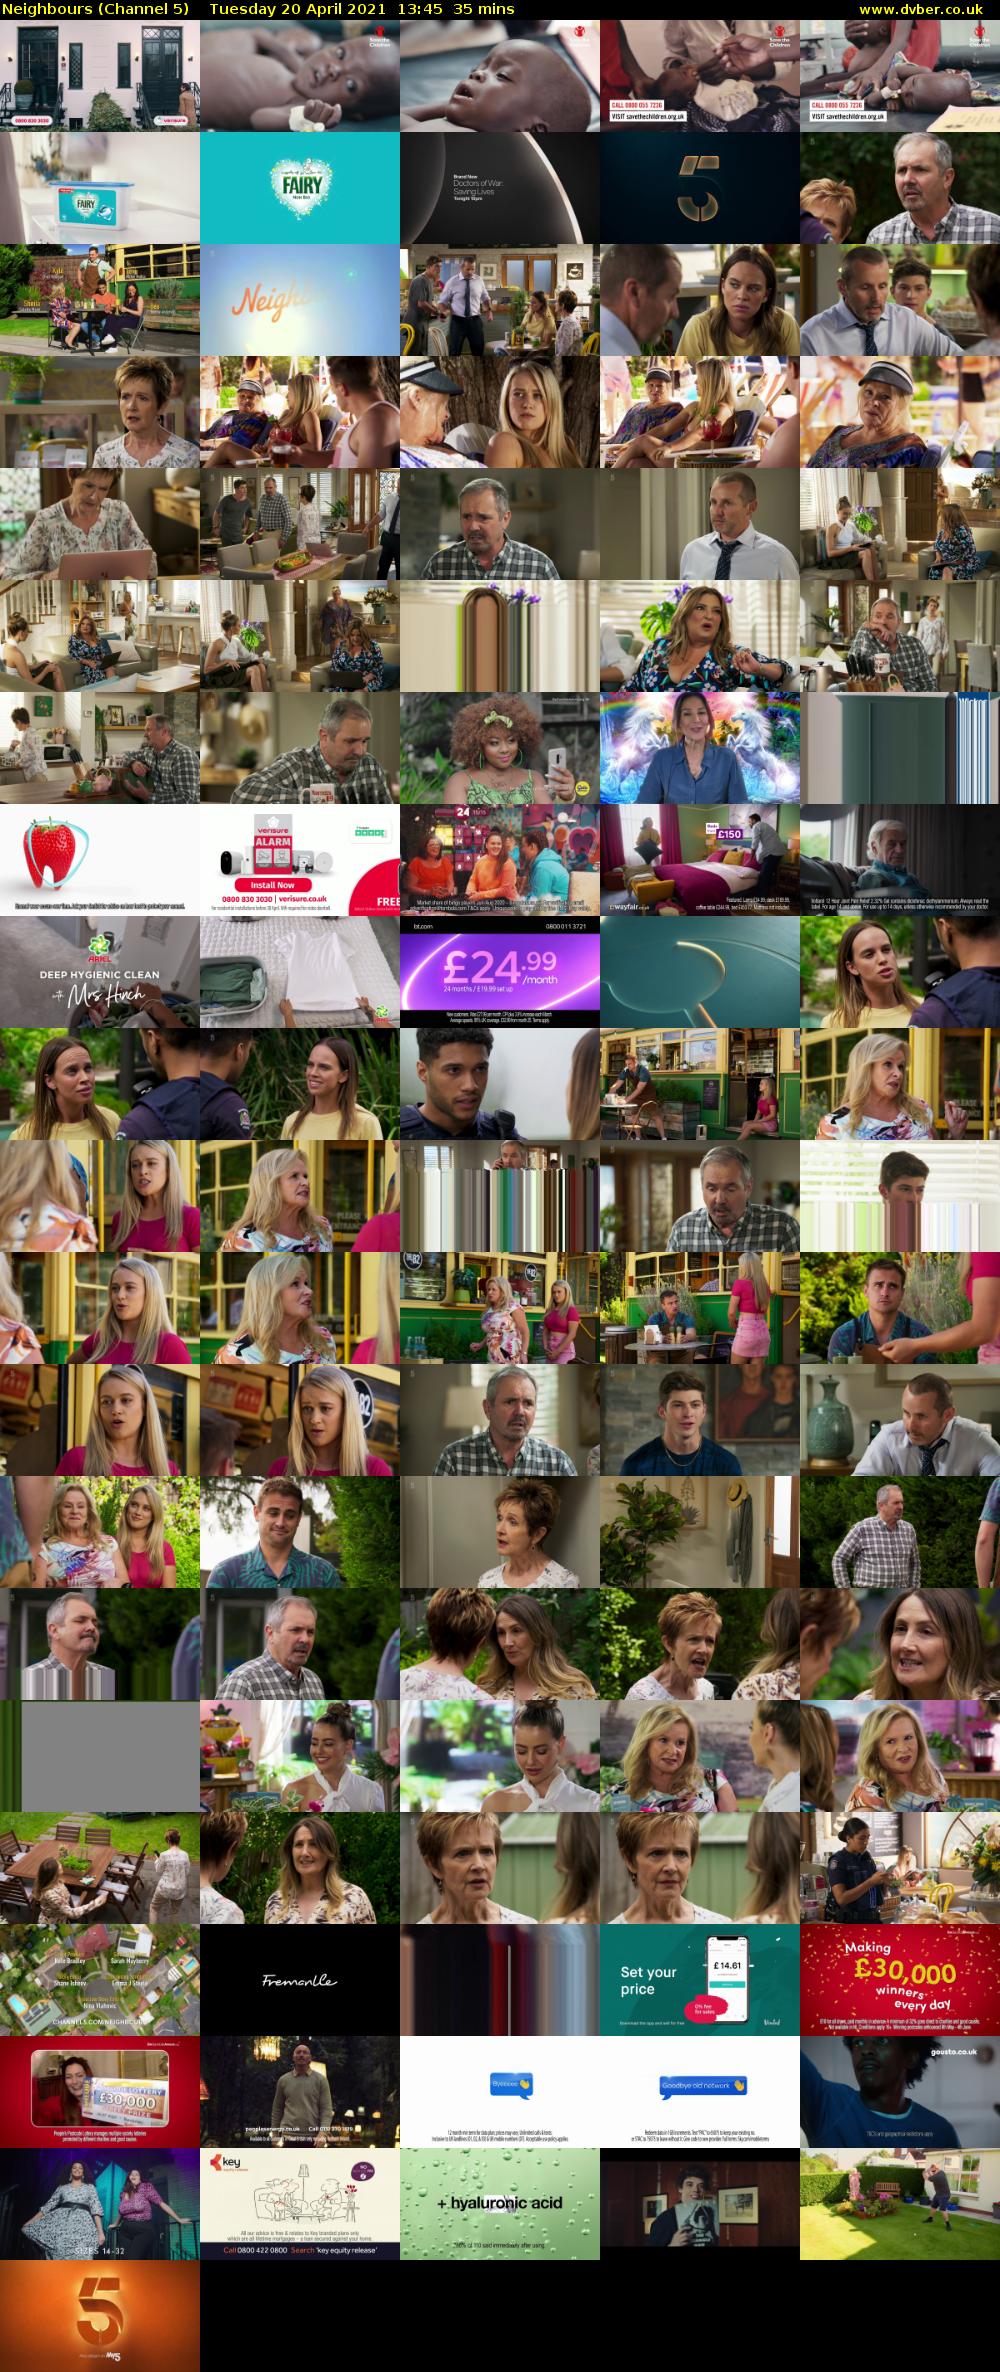 Neighbours (Channel 5) Tuesday 20 April 2021 13:45 - 14:20